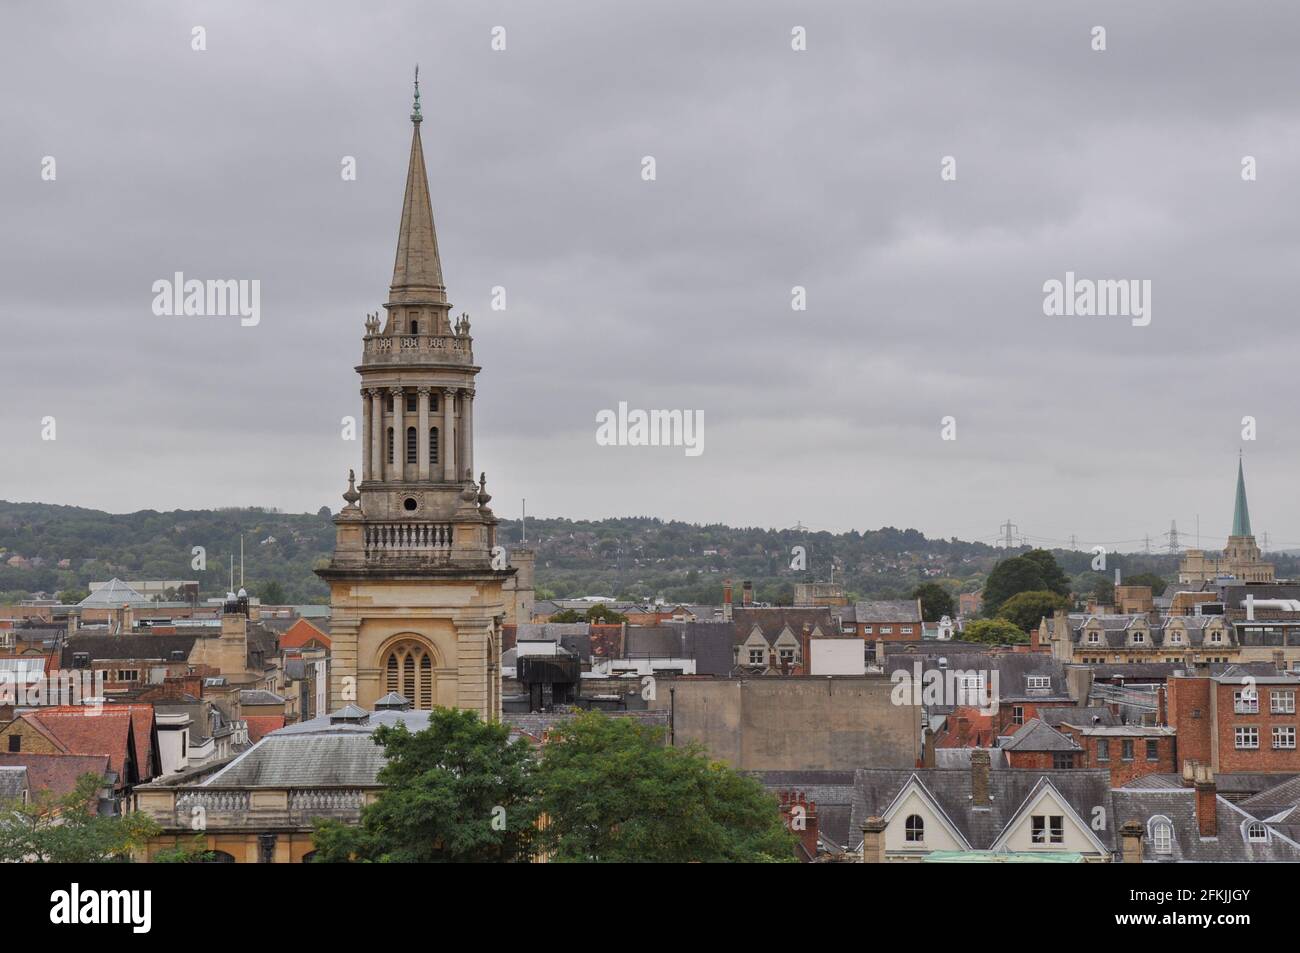 Rooftop view on historical university buildings towards All Saints Church, Oxford, United Kingdom. Overcast sky. Stock Photo